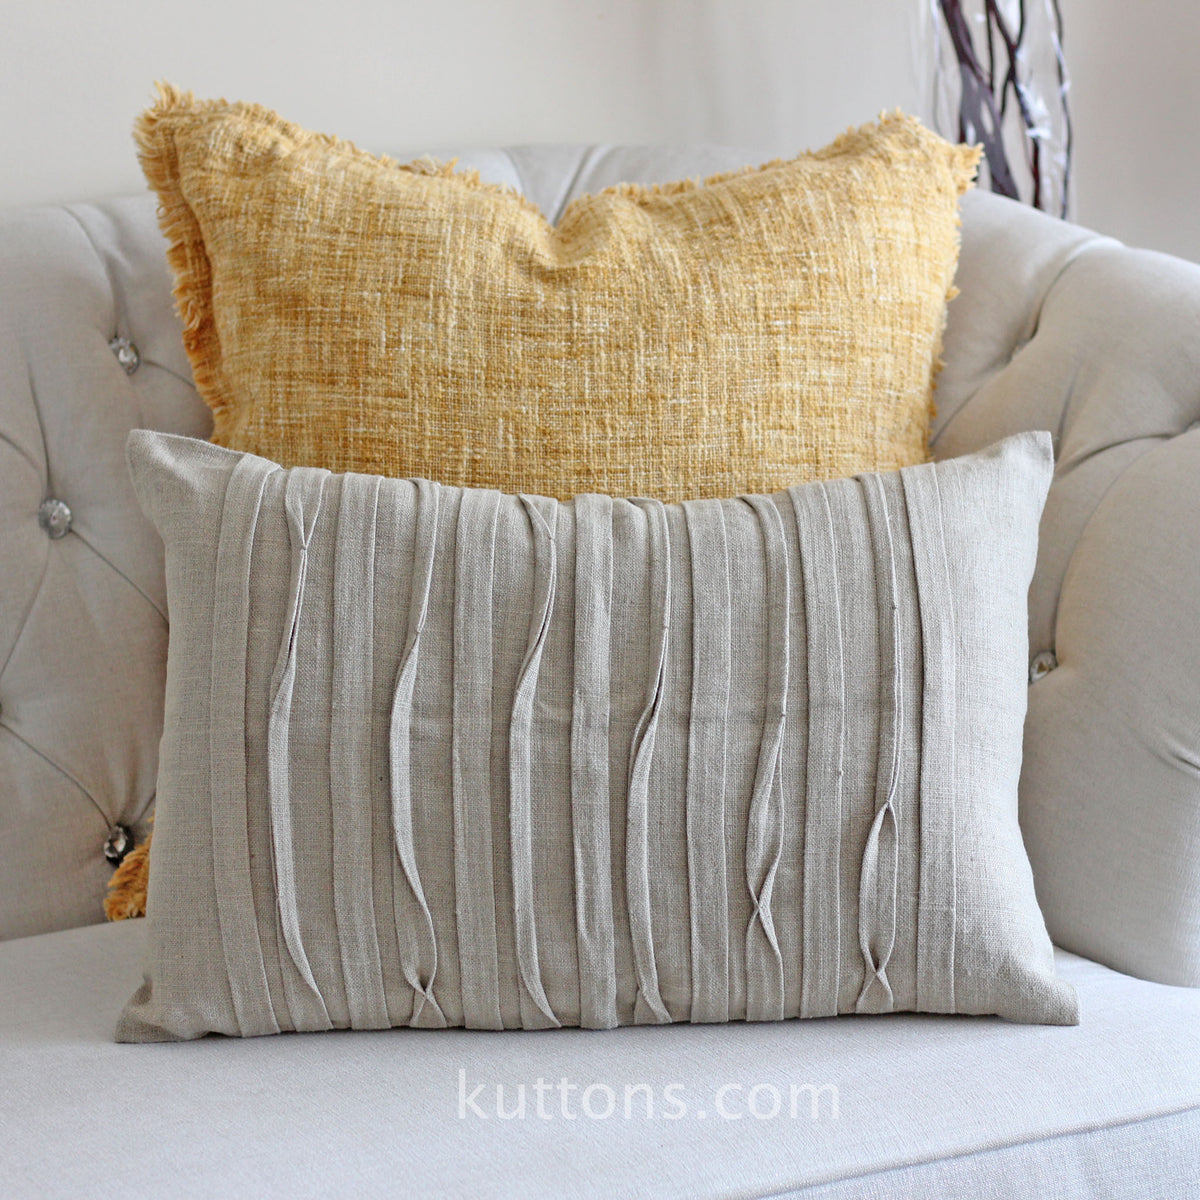 Handcrafted Linen Throw Pillow Cover - Pleated Design | Natural Brown Twisted pleats